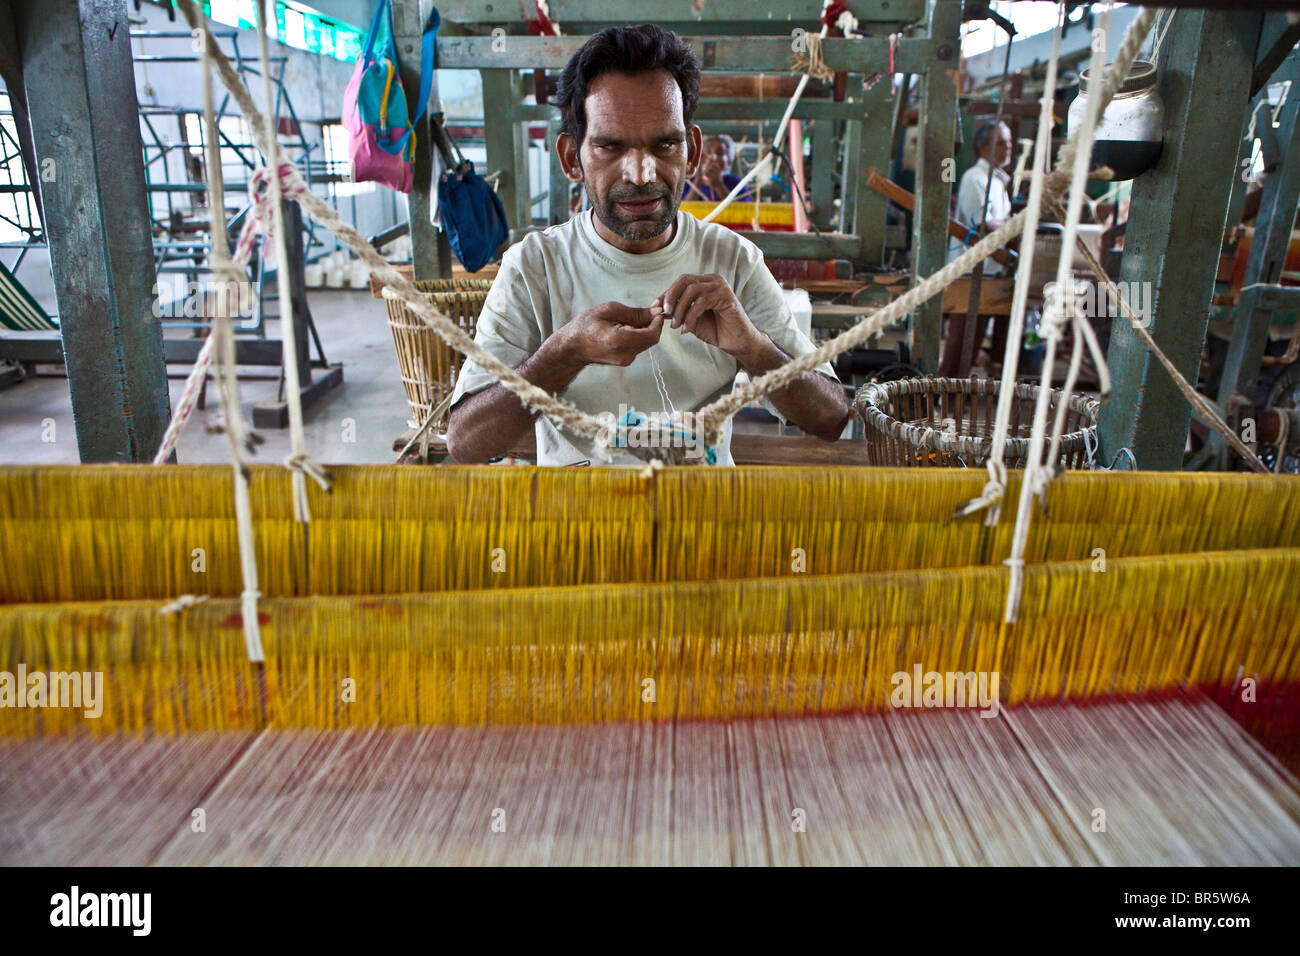 A blind man using a weaving loom at the training centre of the Blind People Association (Andhjan Mandal), Ahmedabad. India. Stock Photo